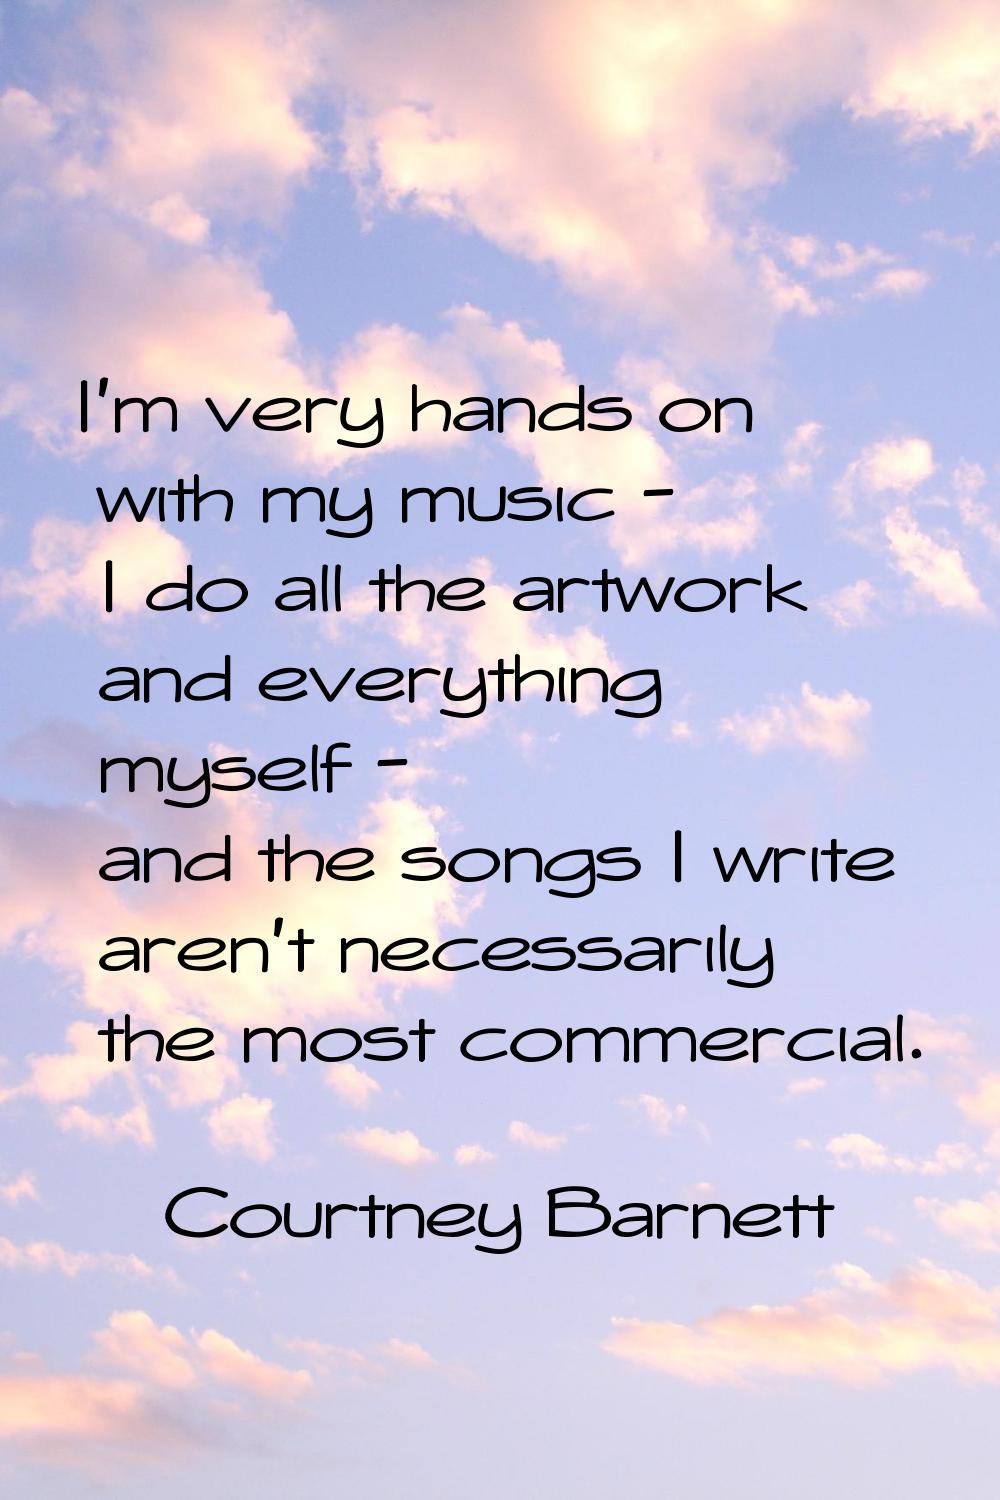 I'm very hands on with my music - I do all the artwork and everything myself - and the songs I writ